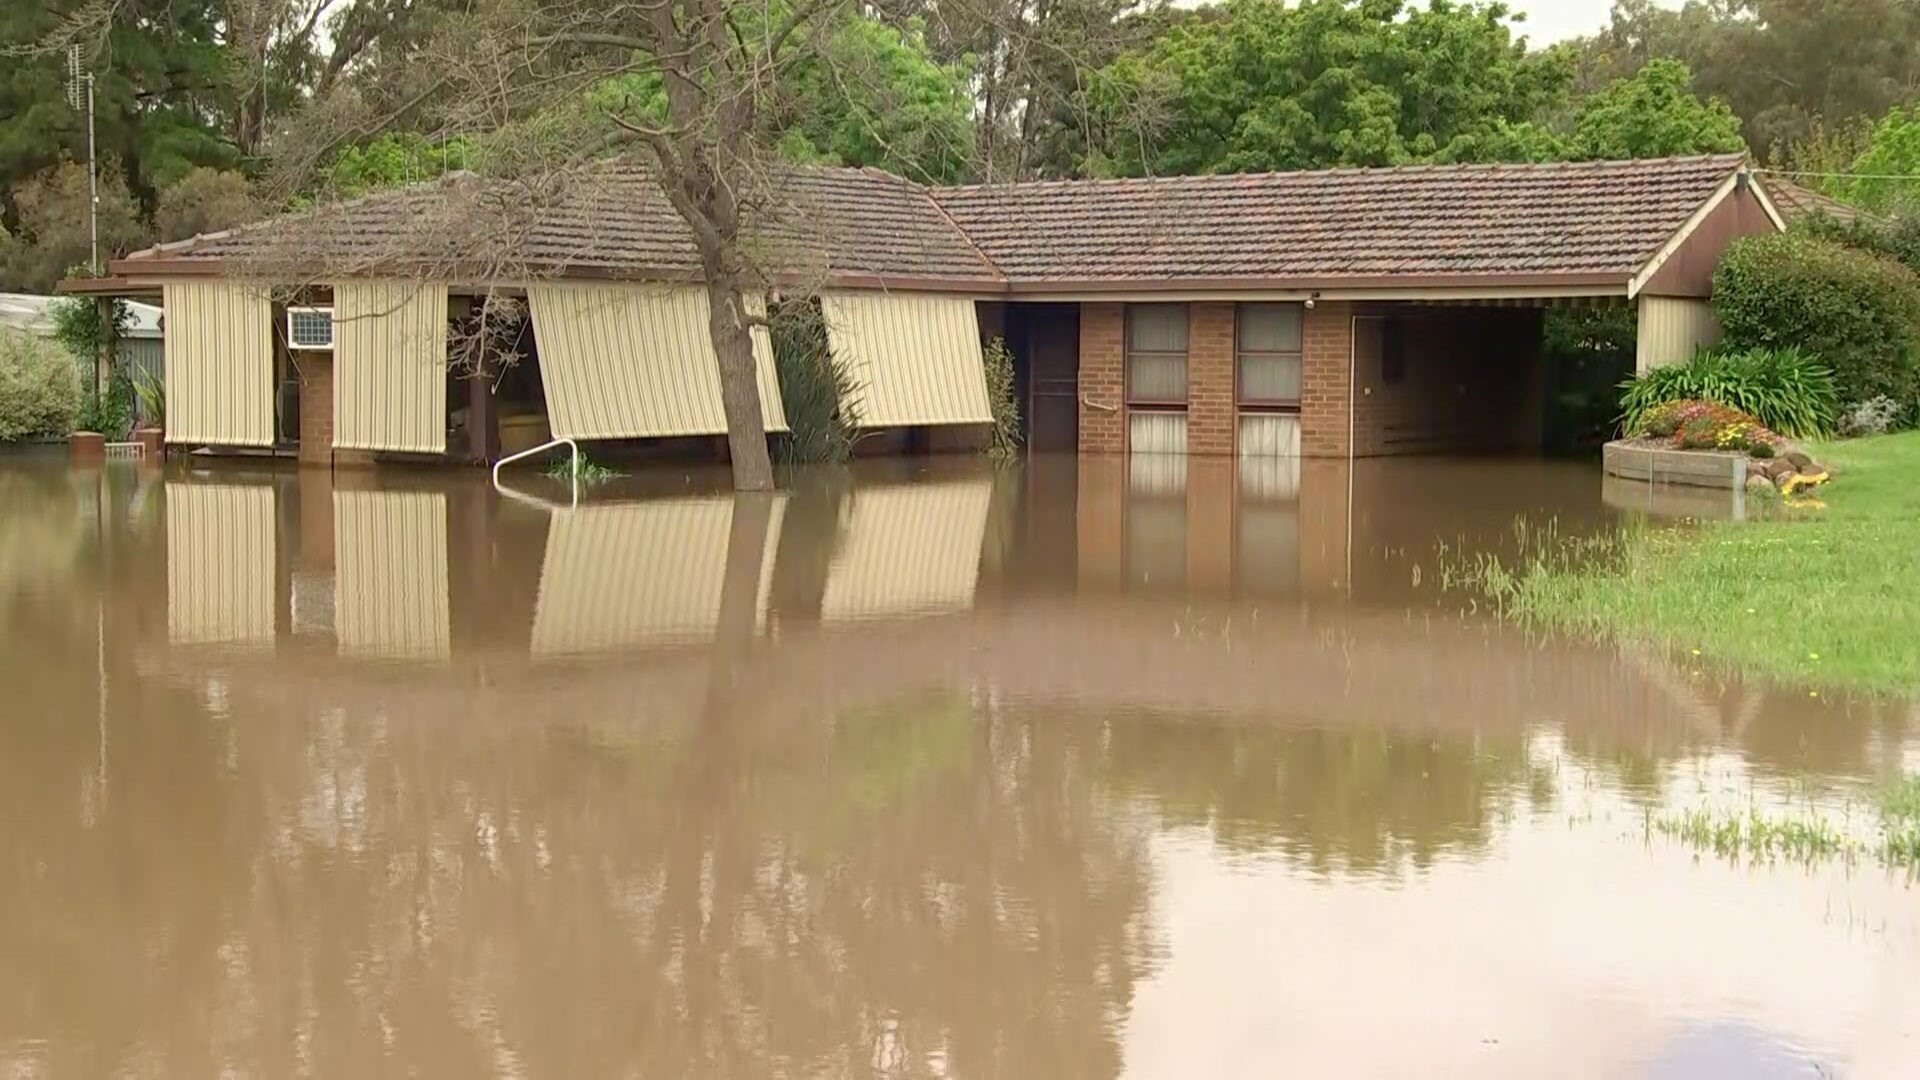 Picture shows a house surrounded by floodwaters.